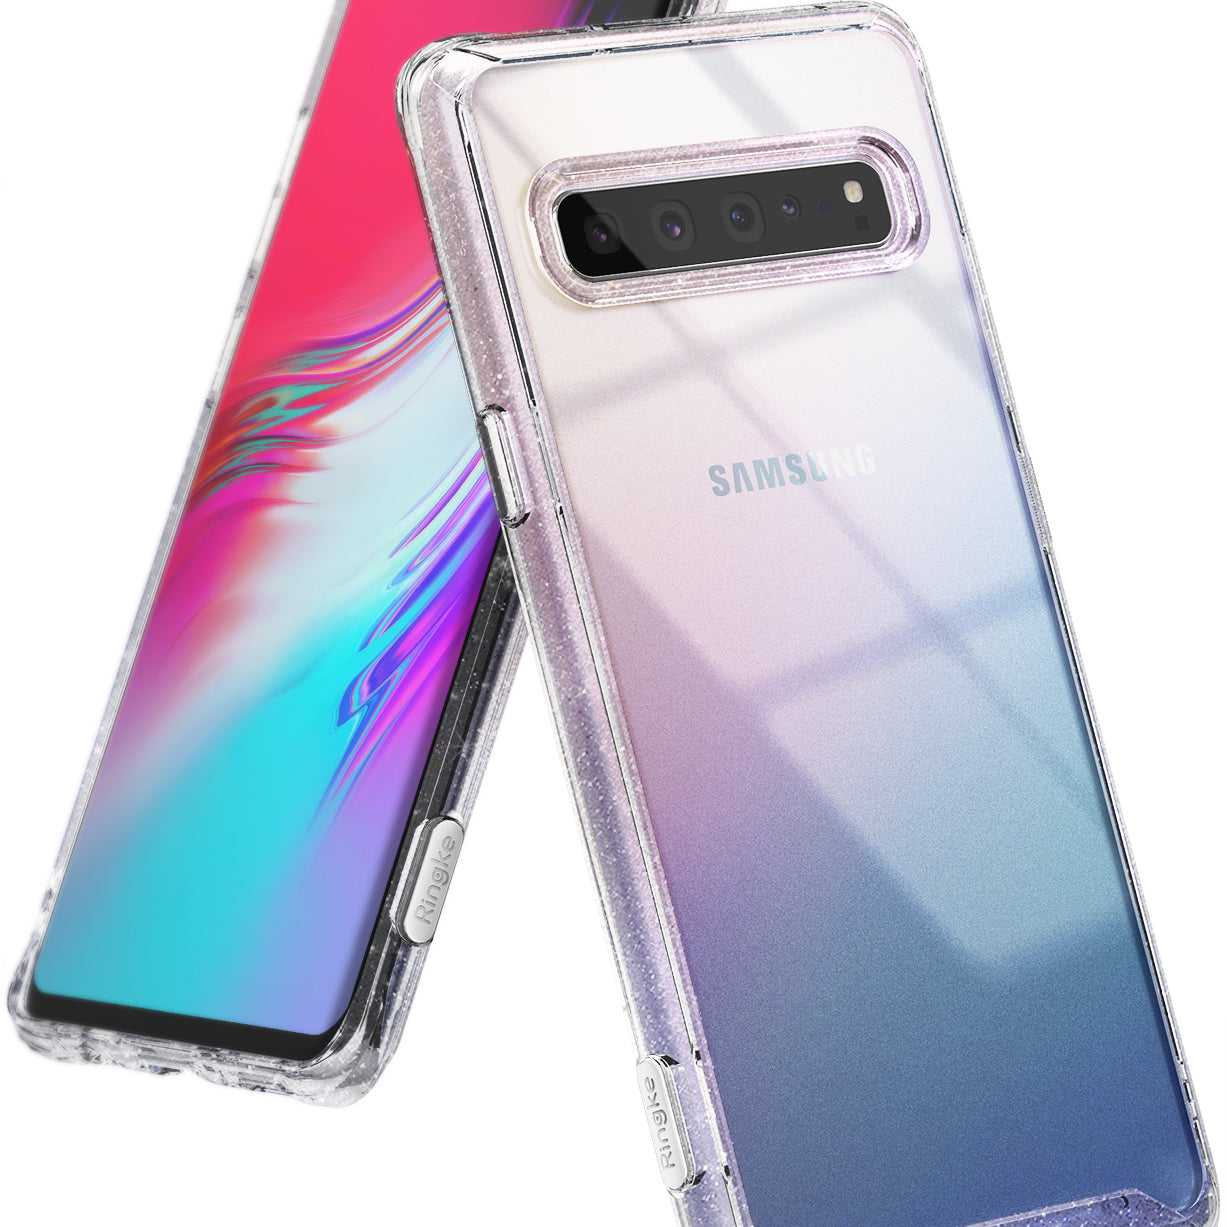 ringke fusion case for samsung galaxy s10 5g - glitter clear